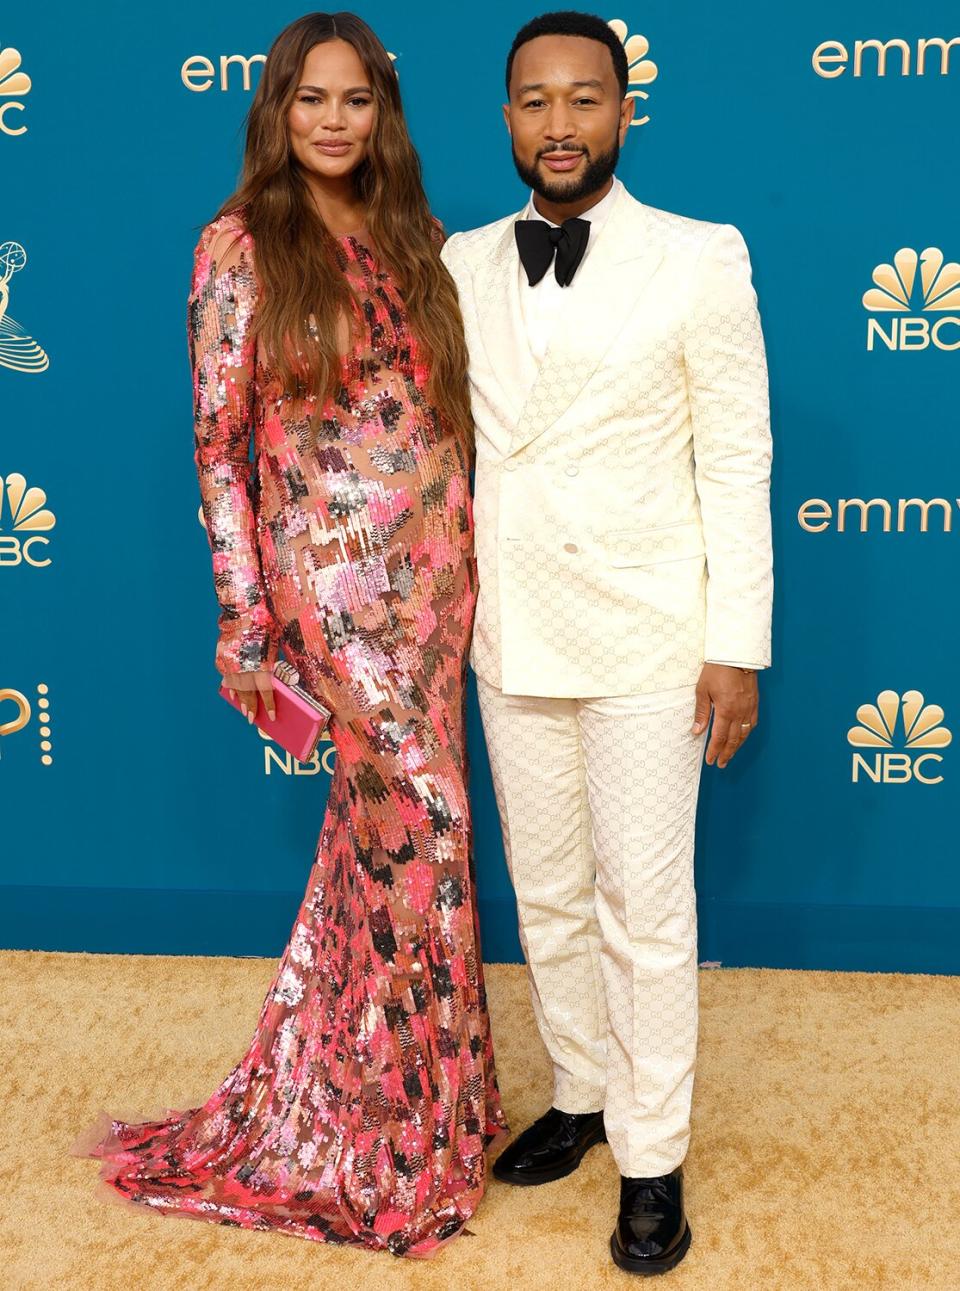 Chrissy Teigen and John Legend attend the 74th Primetime Emmys at Microsoft Theater on September 12, 2022 in Los Angeles, California.